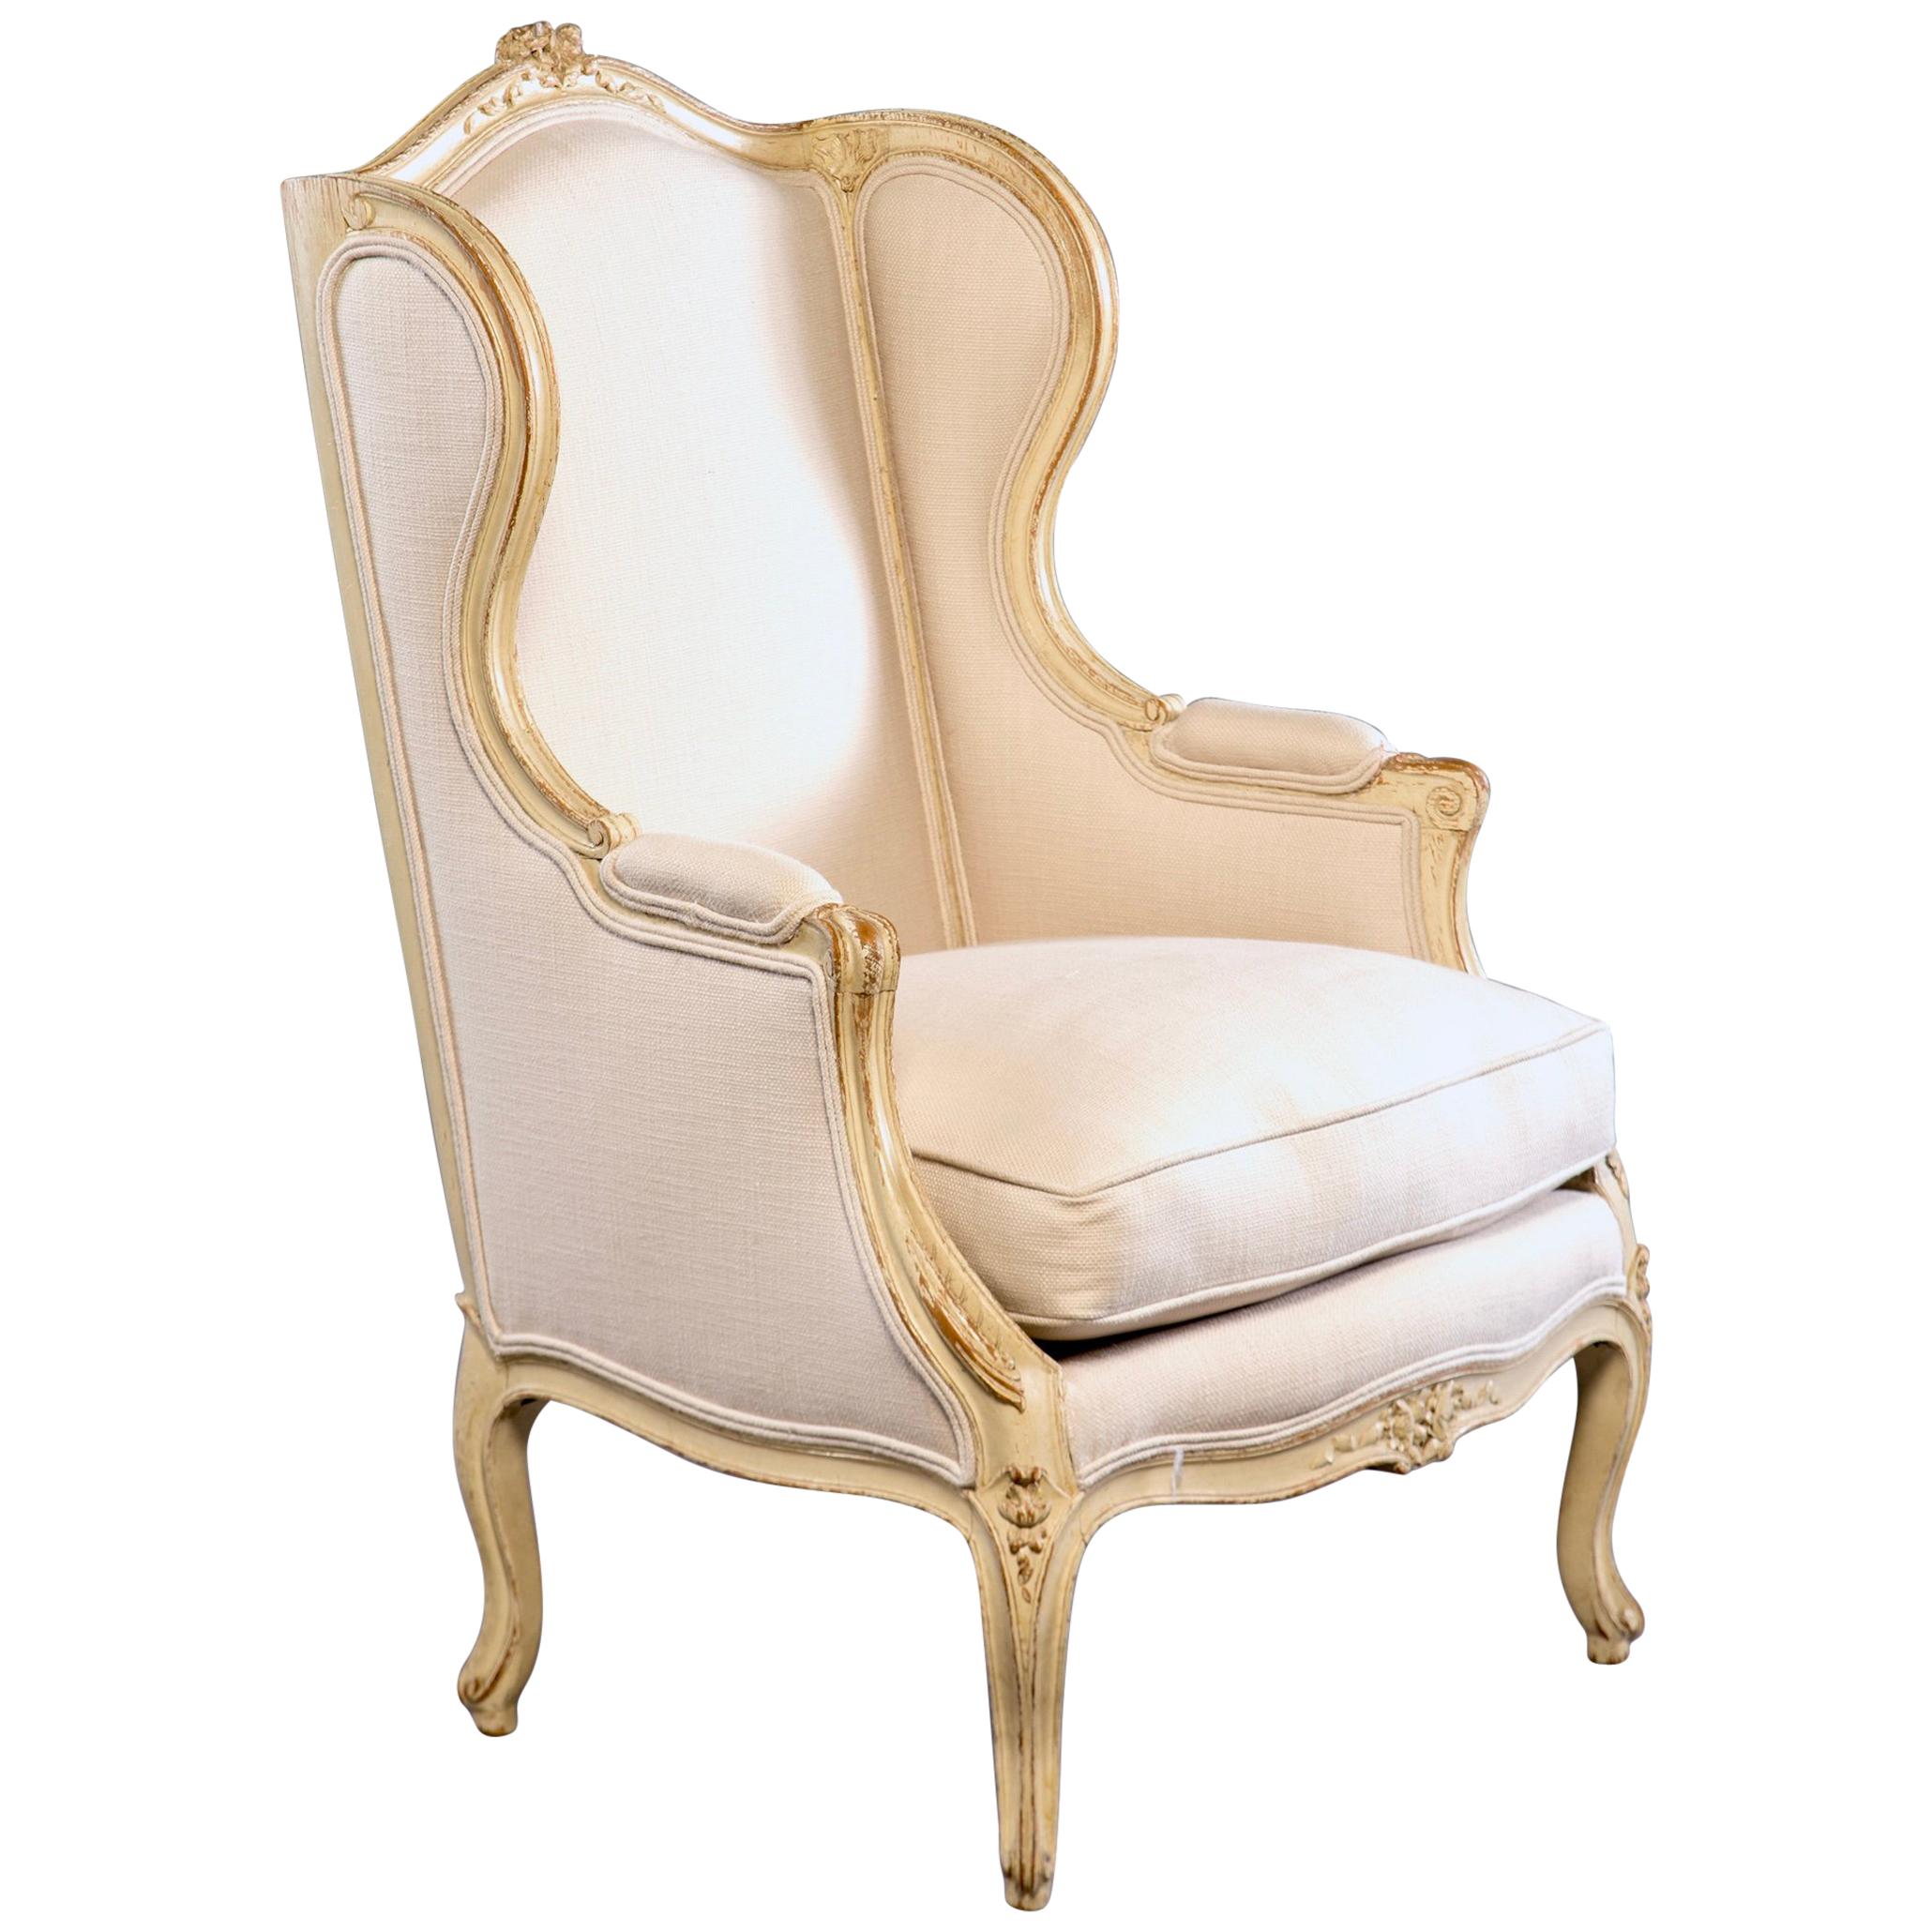 Early 20th Century French Bergère with New Upholstery